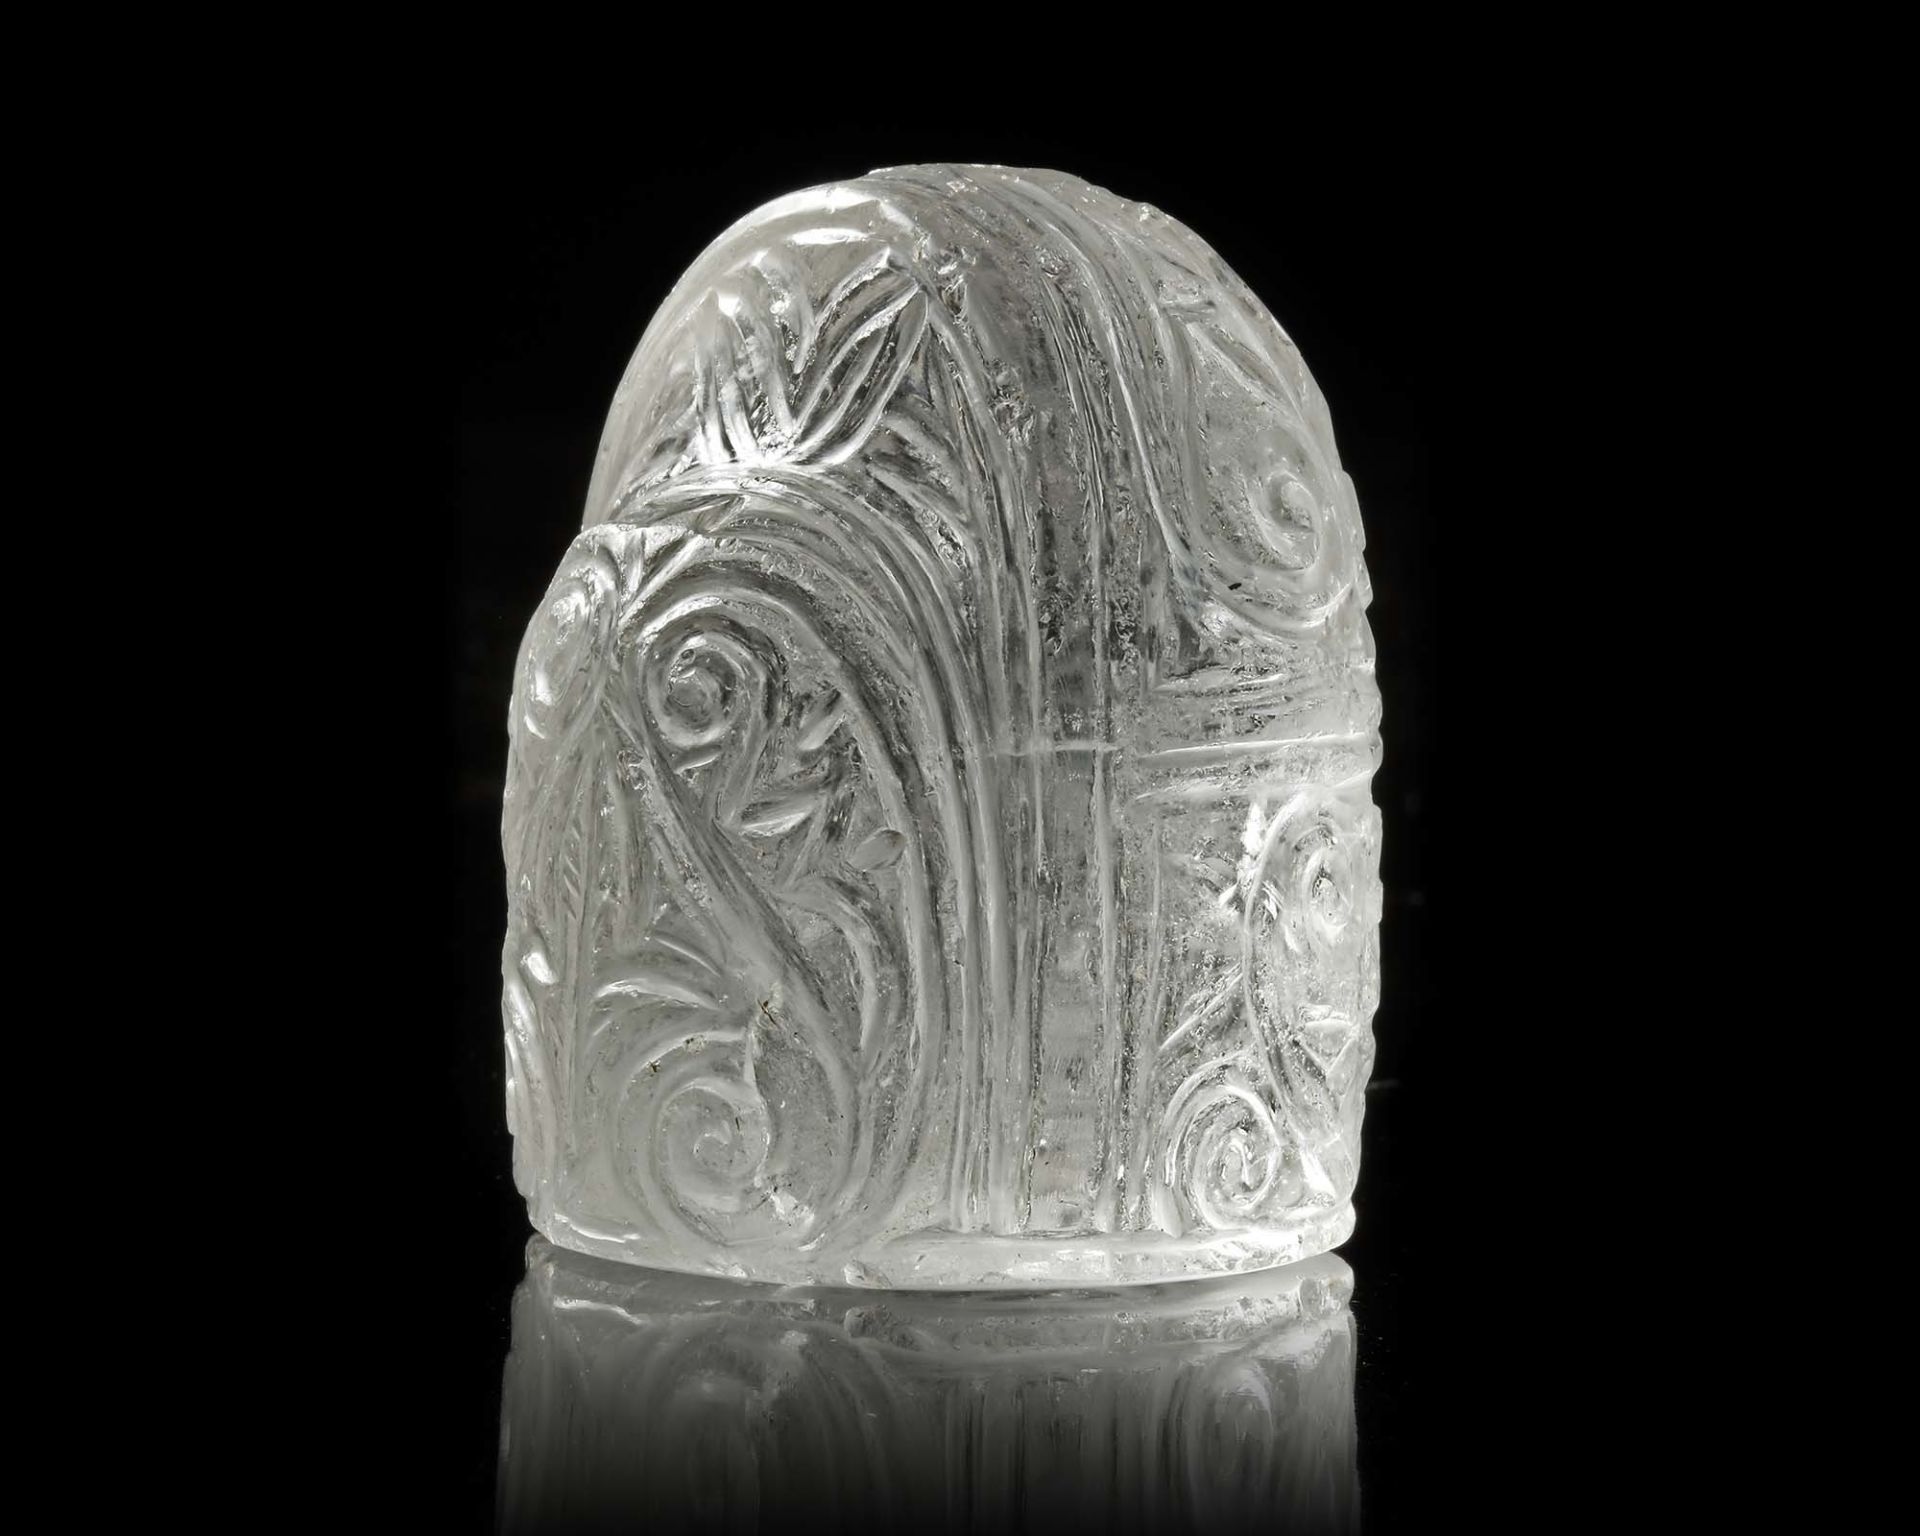 A KING (SHAH) ROCK CRYSTAL CHESS PIECE, IRAQ OR KHORASAN, LATE 9TH-EARLY 10TH CENTURY